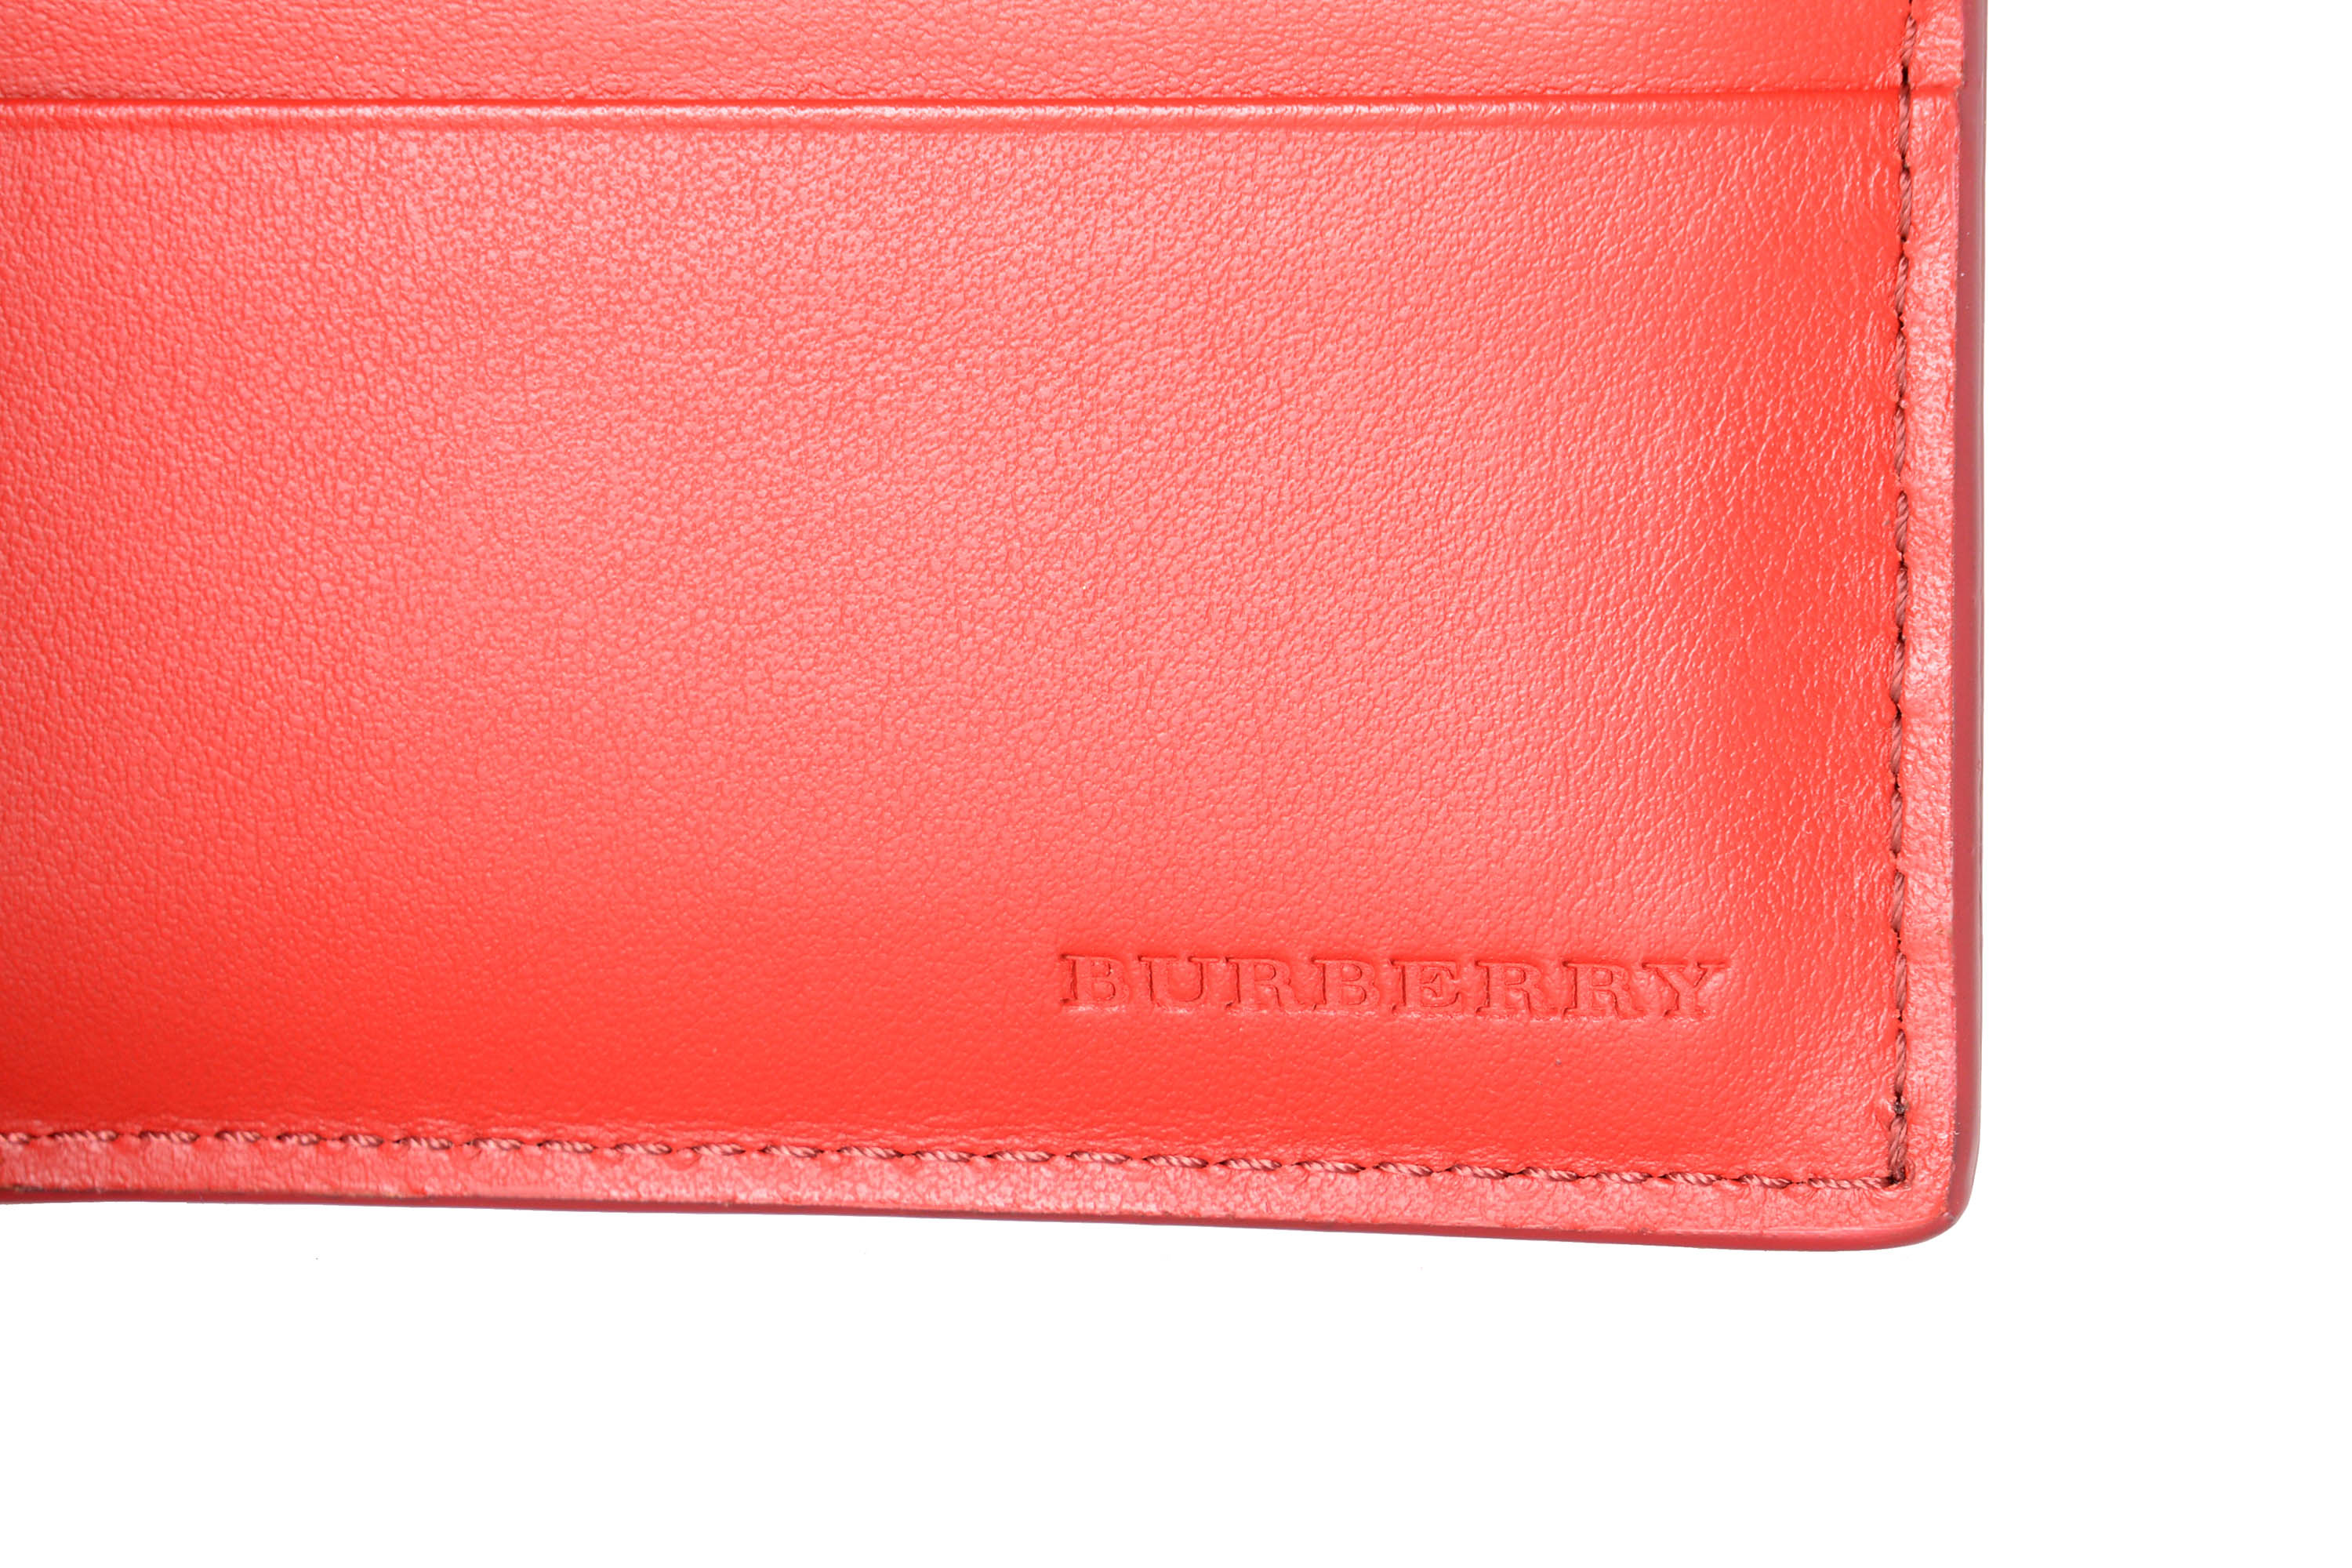 Burberry Red Wallet – Bluefly